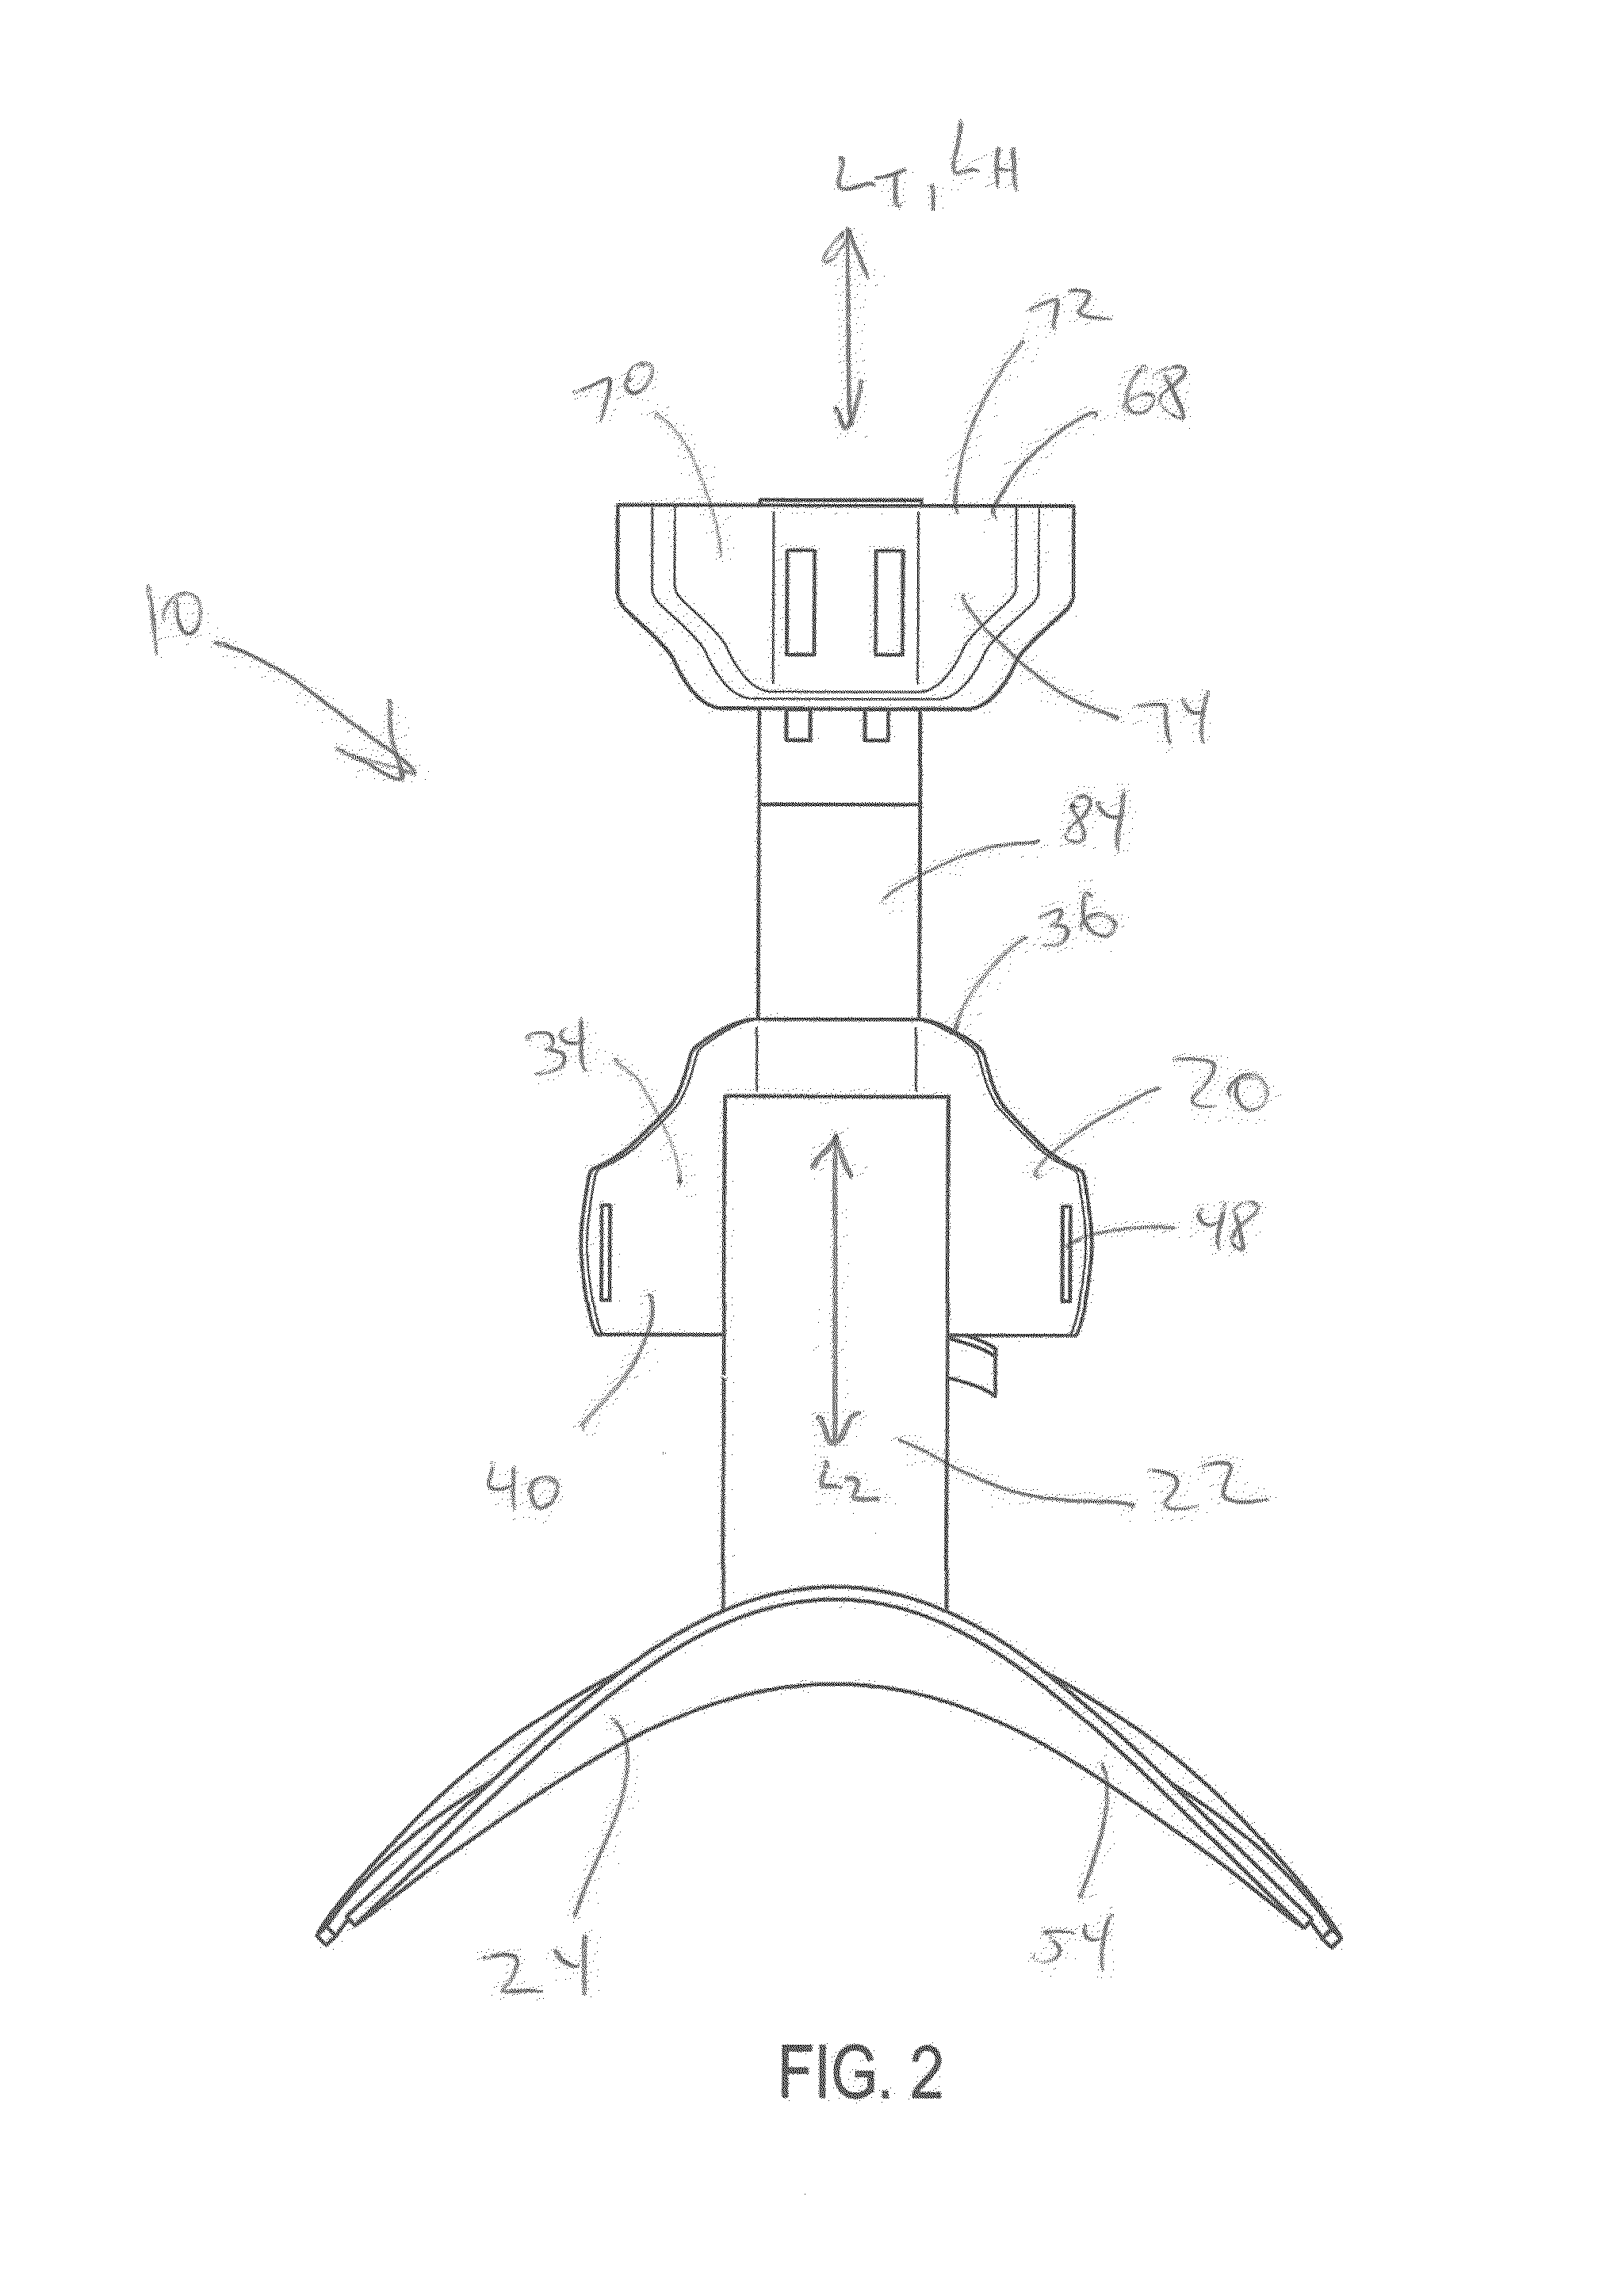 Orthotic and assistive devices, systems and methods